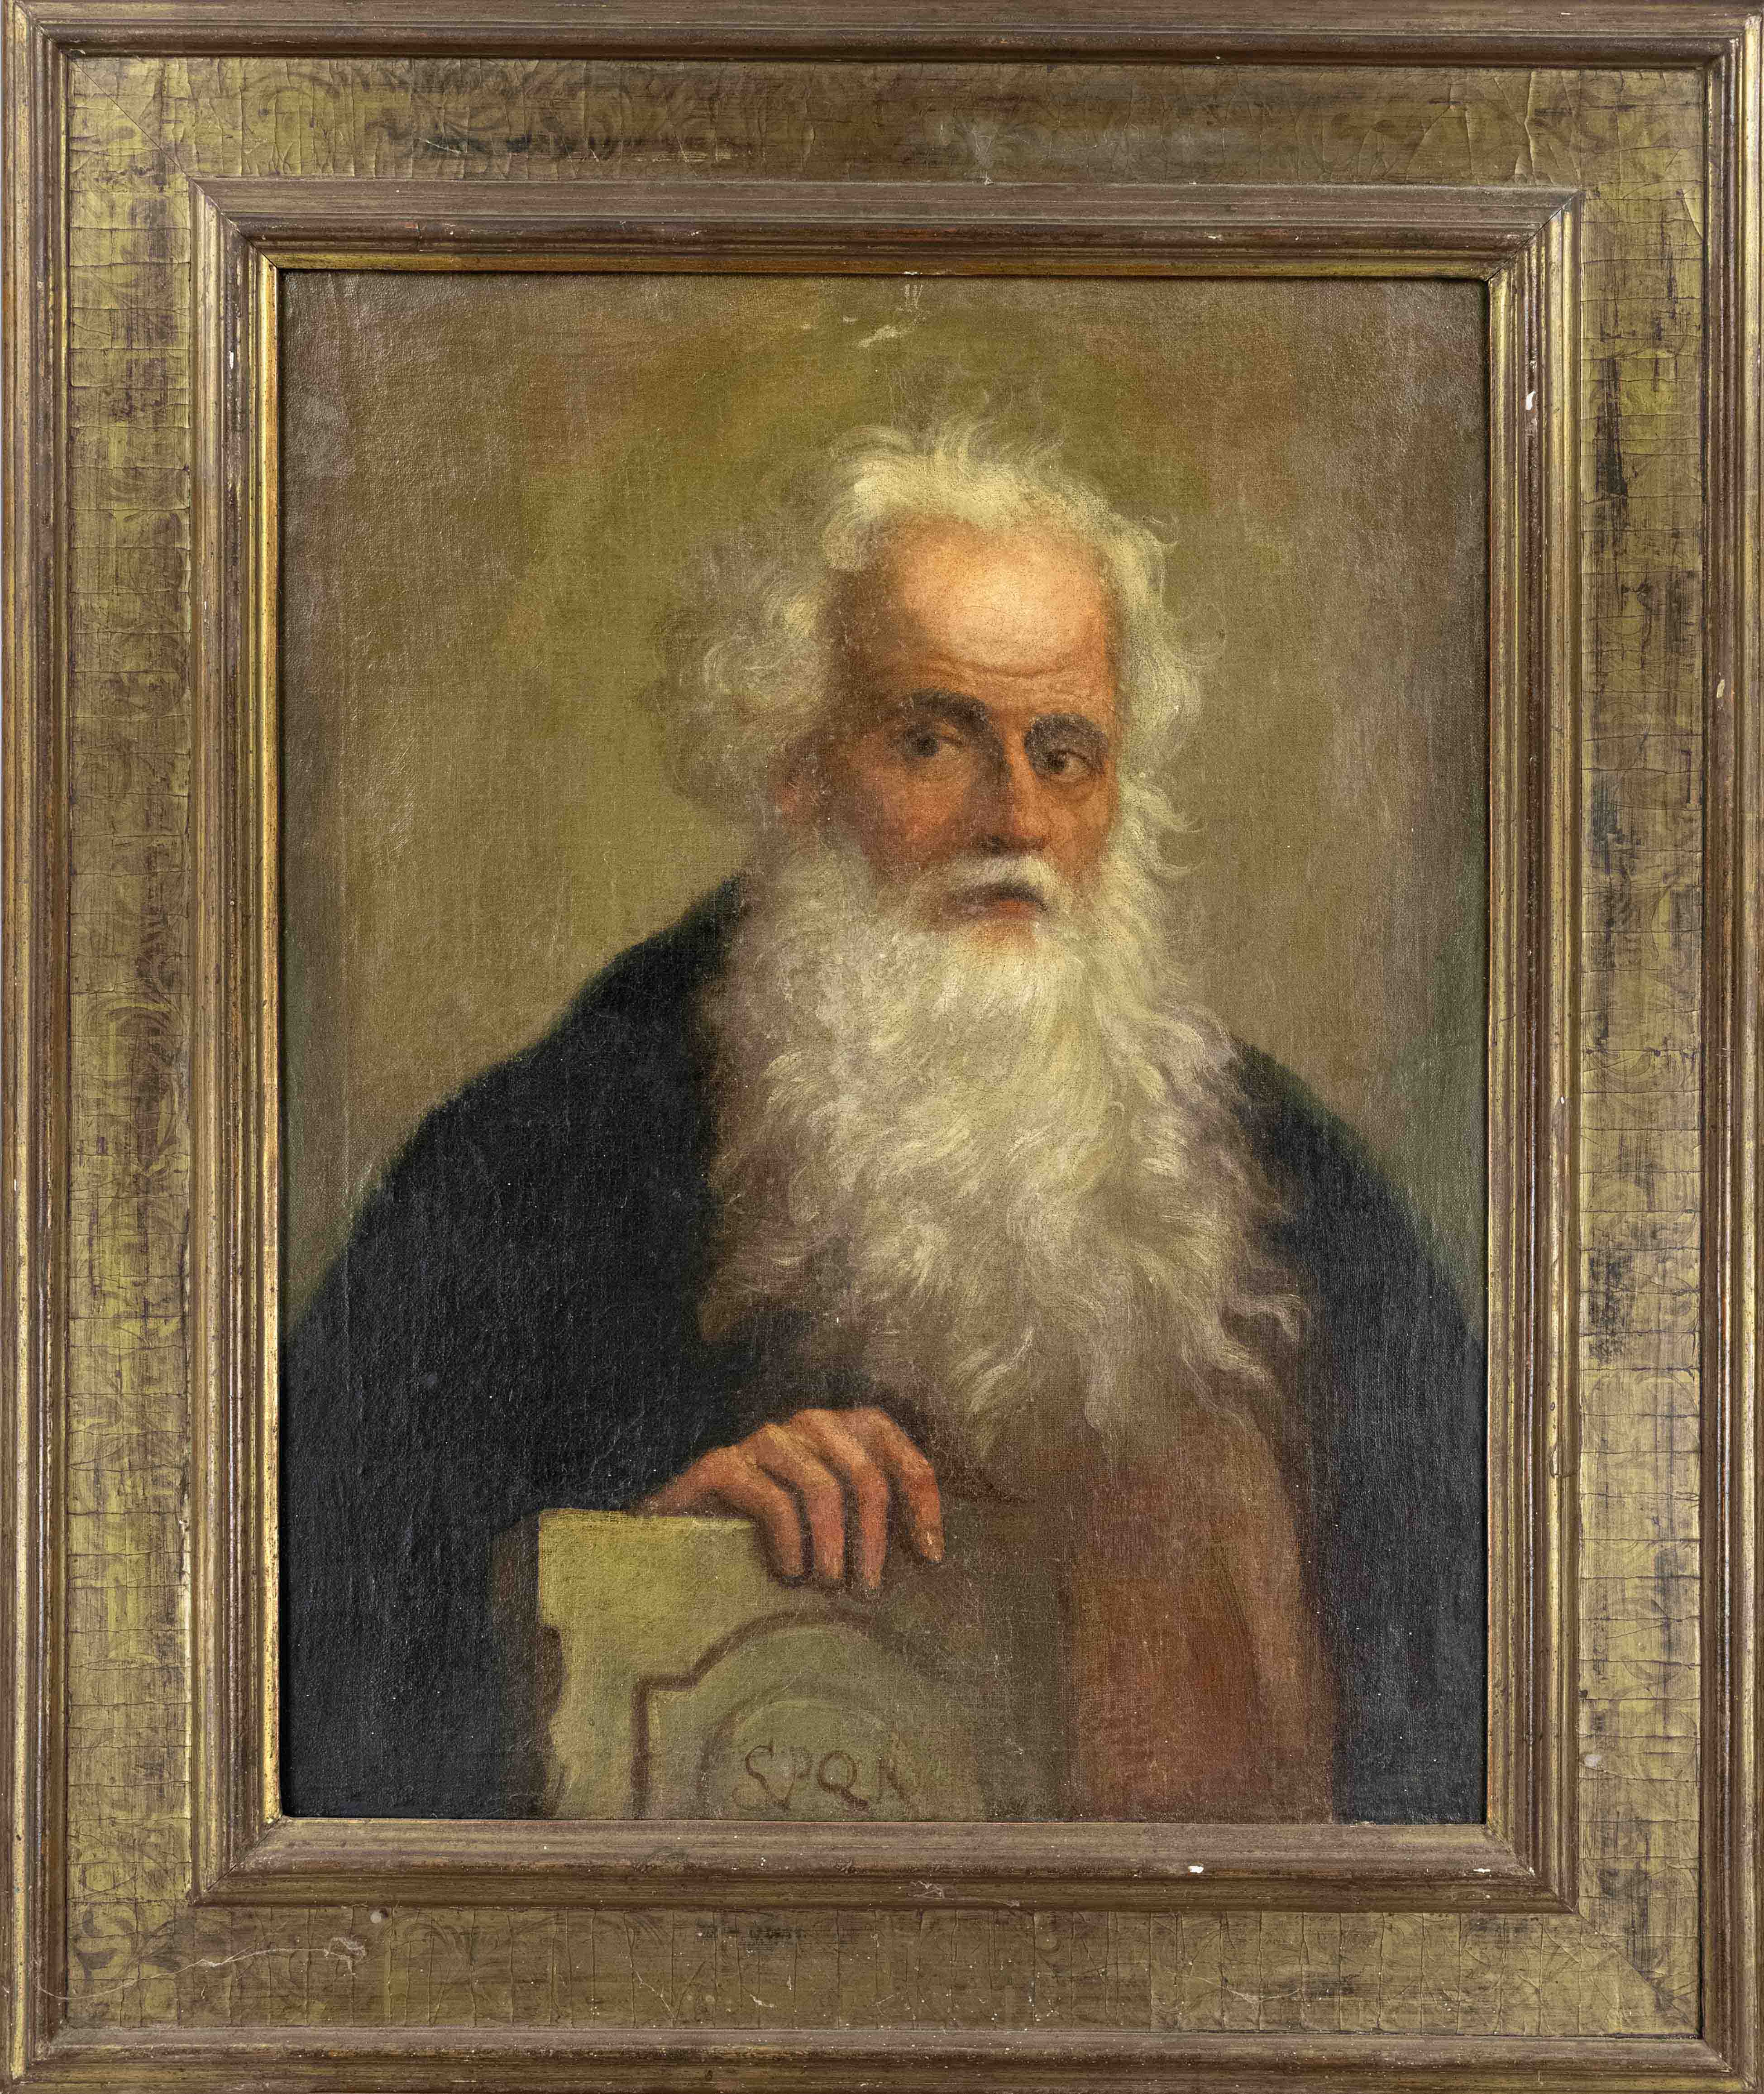 Anonymous 19th century artist, Bust portrait of an old Roman with the insignia ''SPQR'' on a